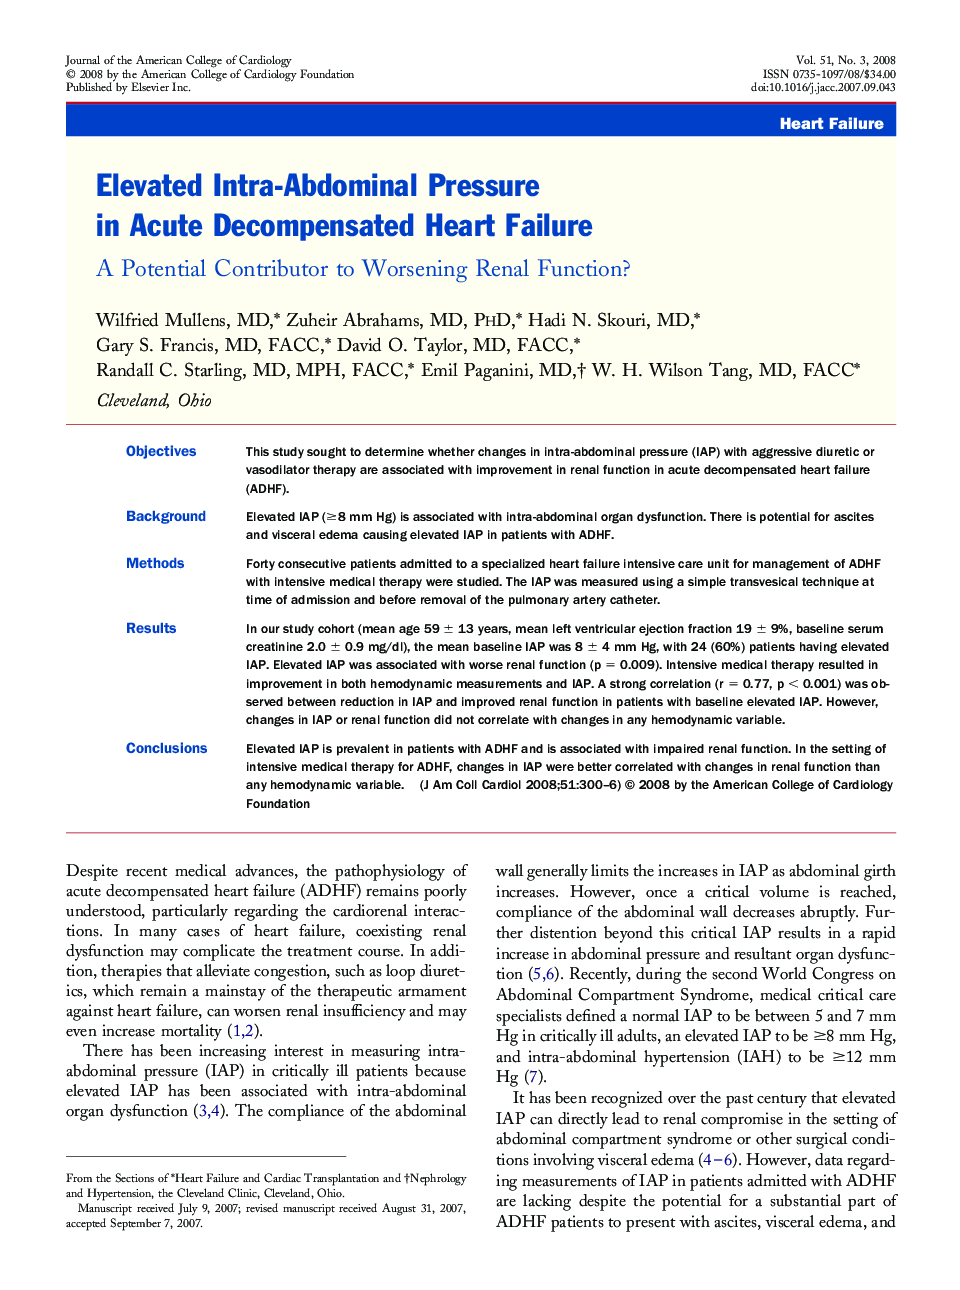 Elevated Intra-Abdominal Pressure in Acute Decompensated Heart Failure: A Potential Contributor to Worsening Renal Function?